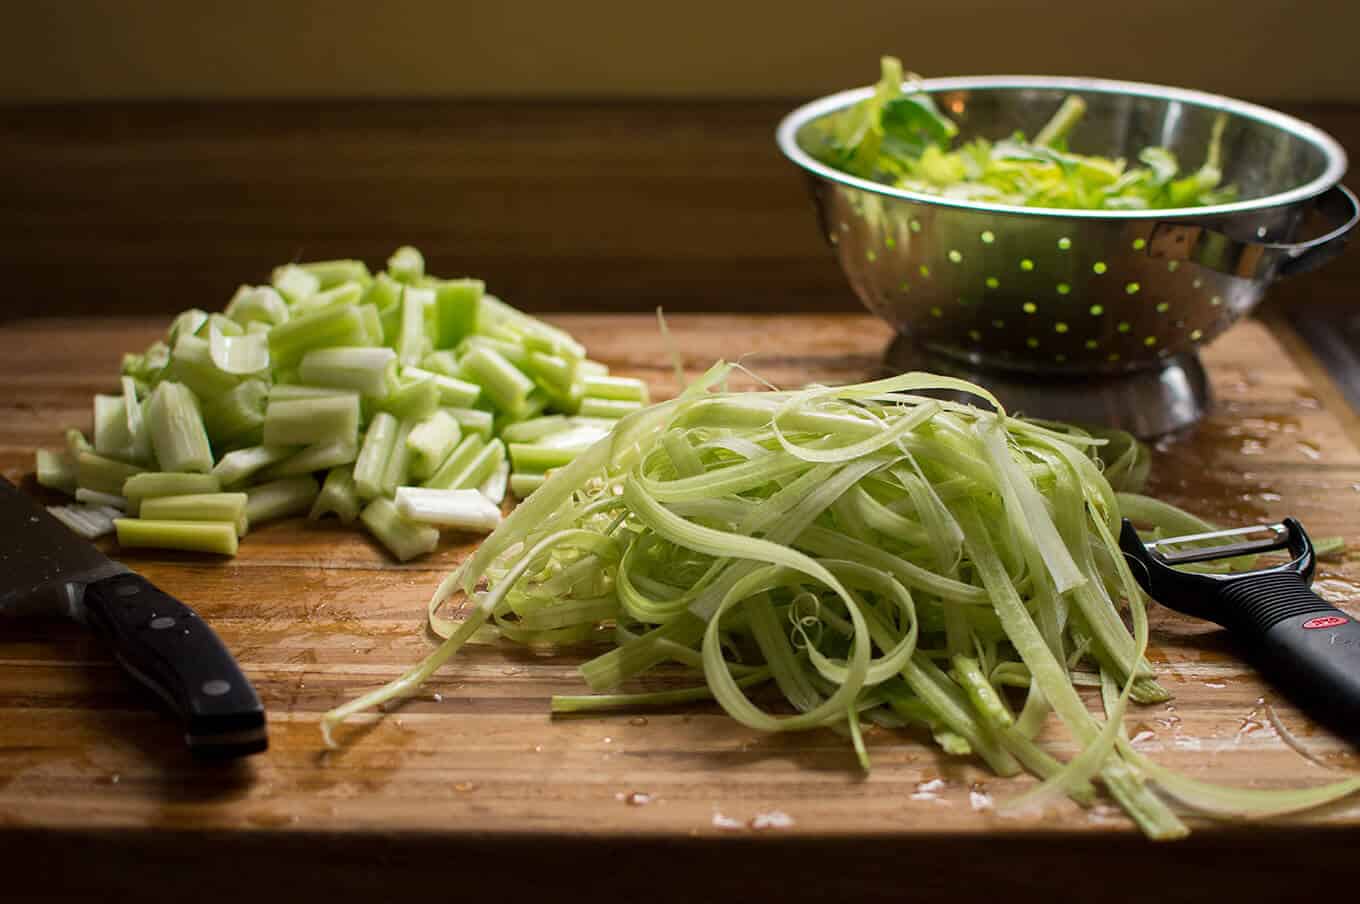 Chopped and peeled celery on a wooden cutting board.